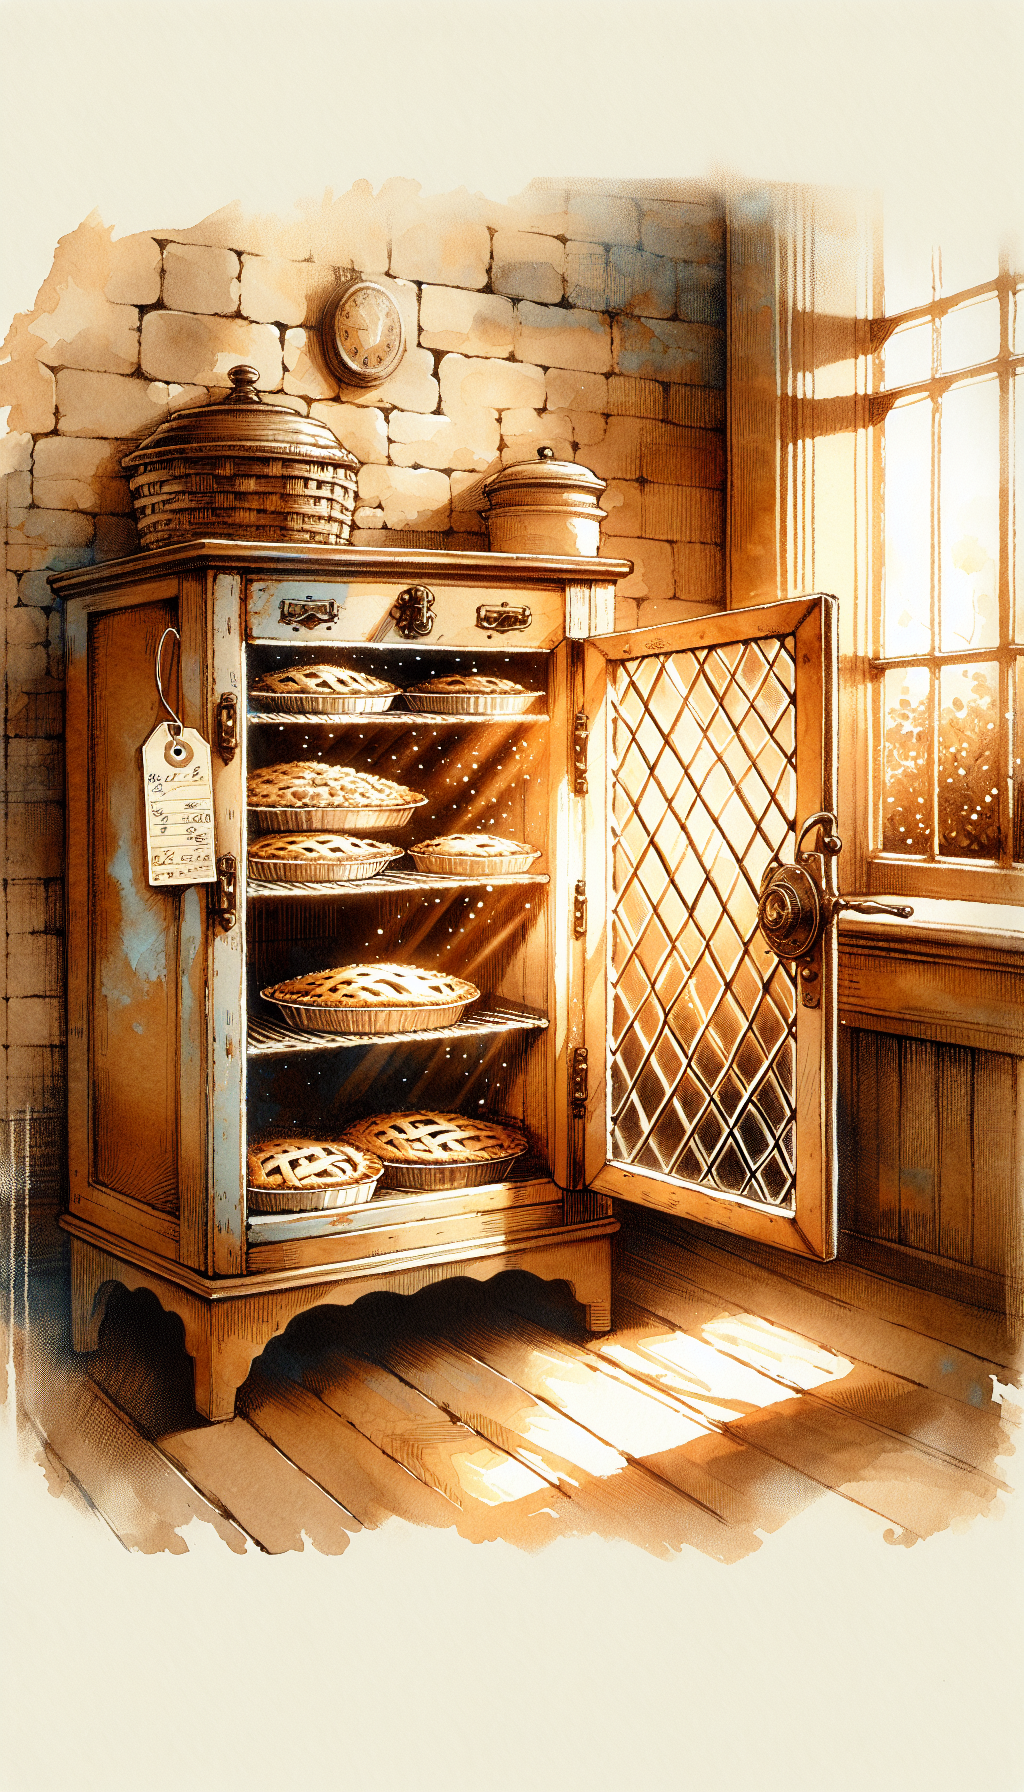 An illustration depicts a rustic kitchen corner with sunlight filtering through a delicate lattice-work vintage pie safe. Inside, glowing golden pies are visible, emblematic of the pie safe's culinary heritage. Atop, an antique price tag dangles, emphasizing its value. The style is a blend of warm sepia tones and watercolor textures, bringing out the coziness and historical worth of the pie safe.